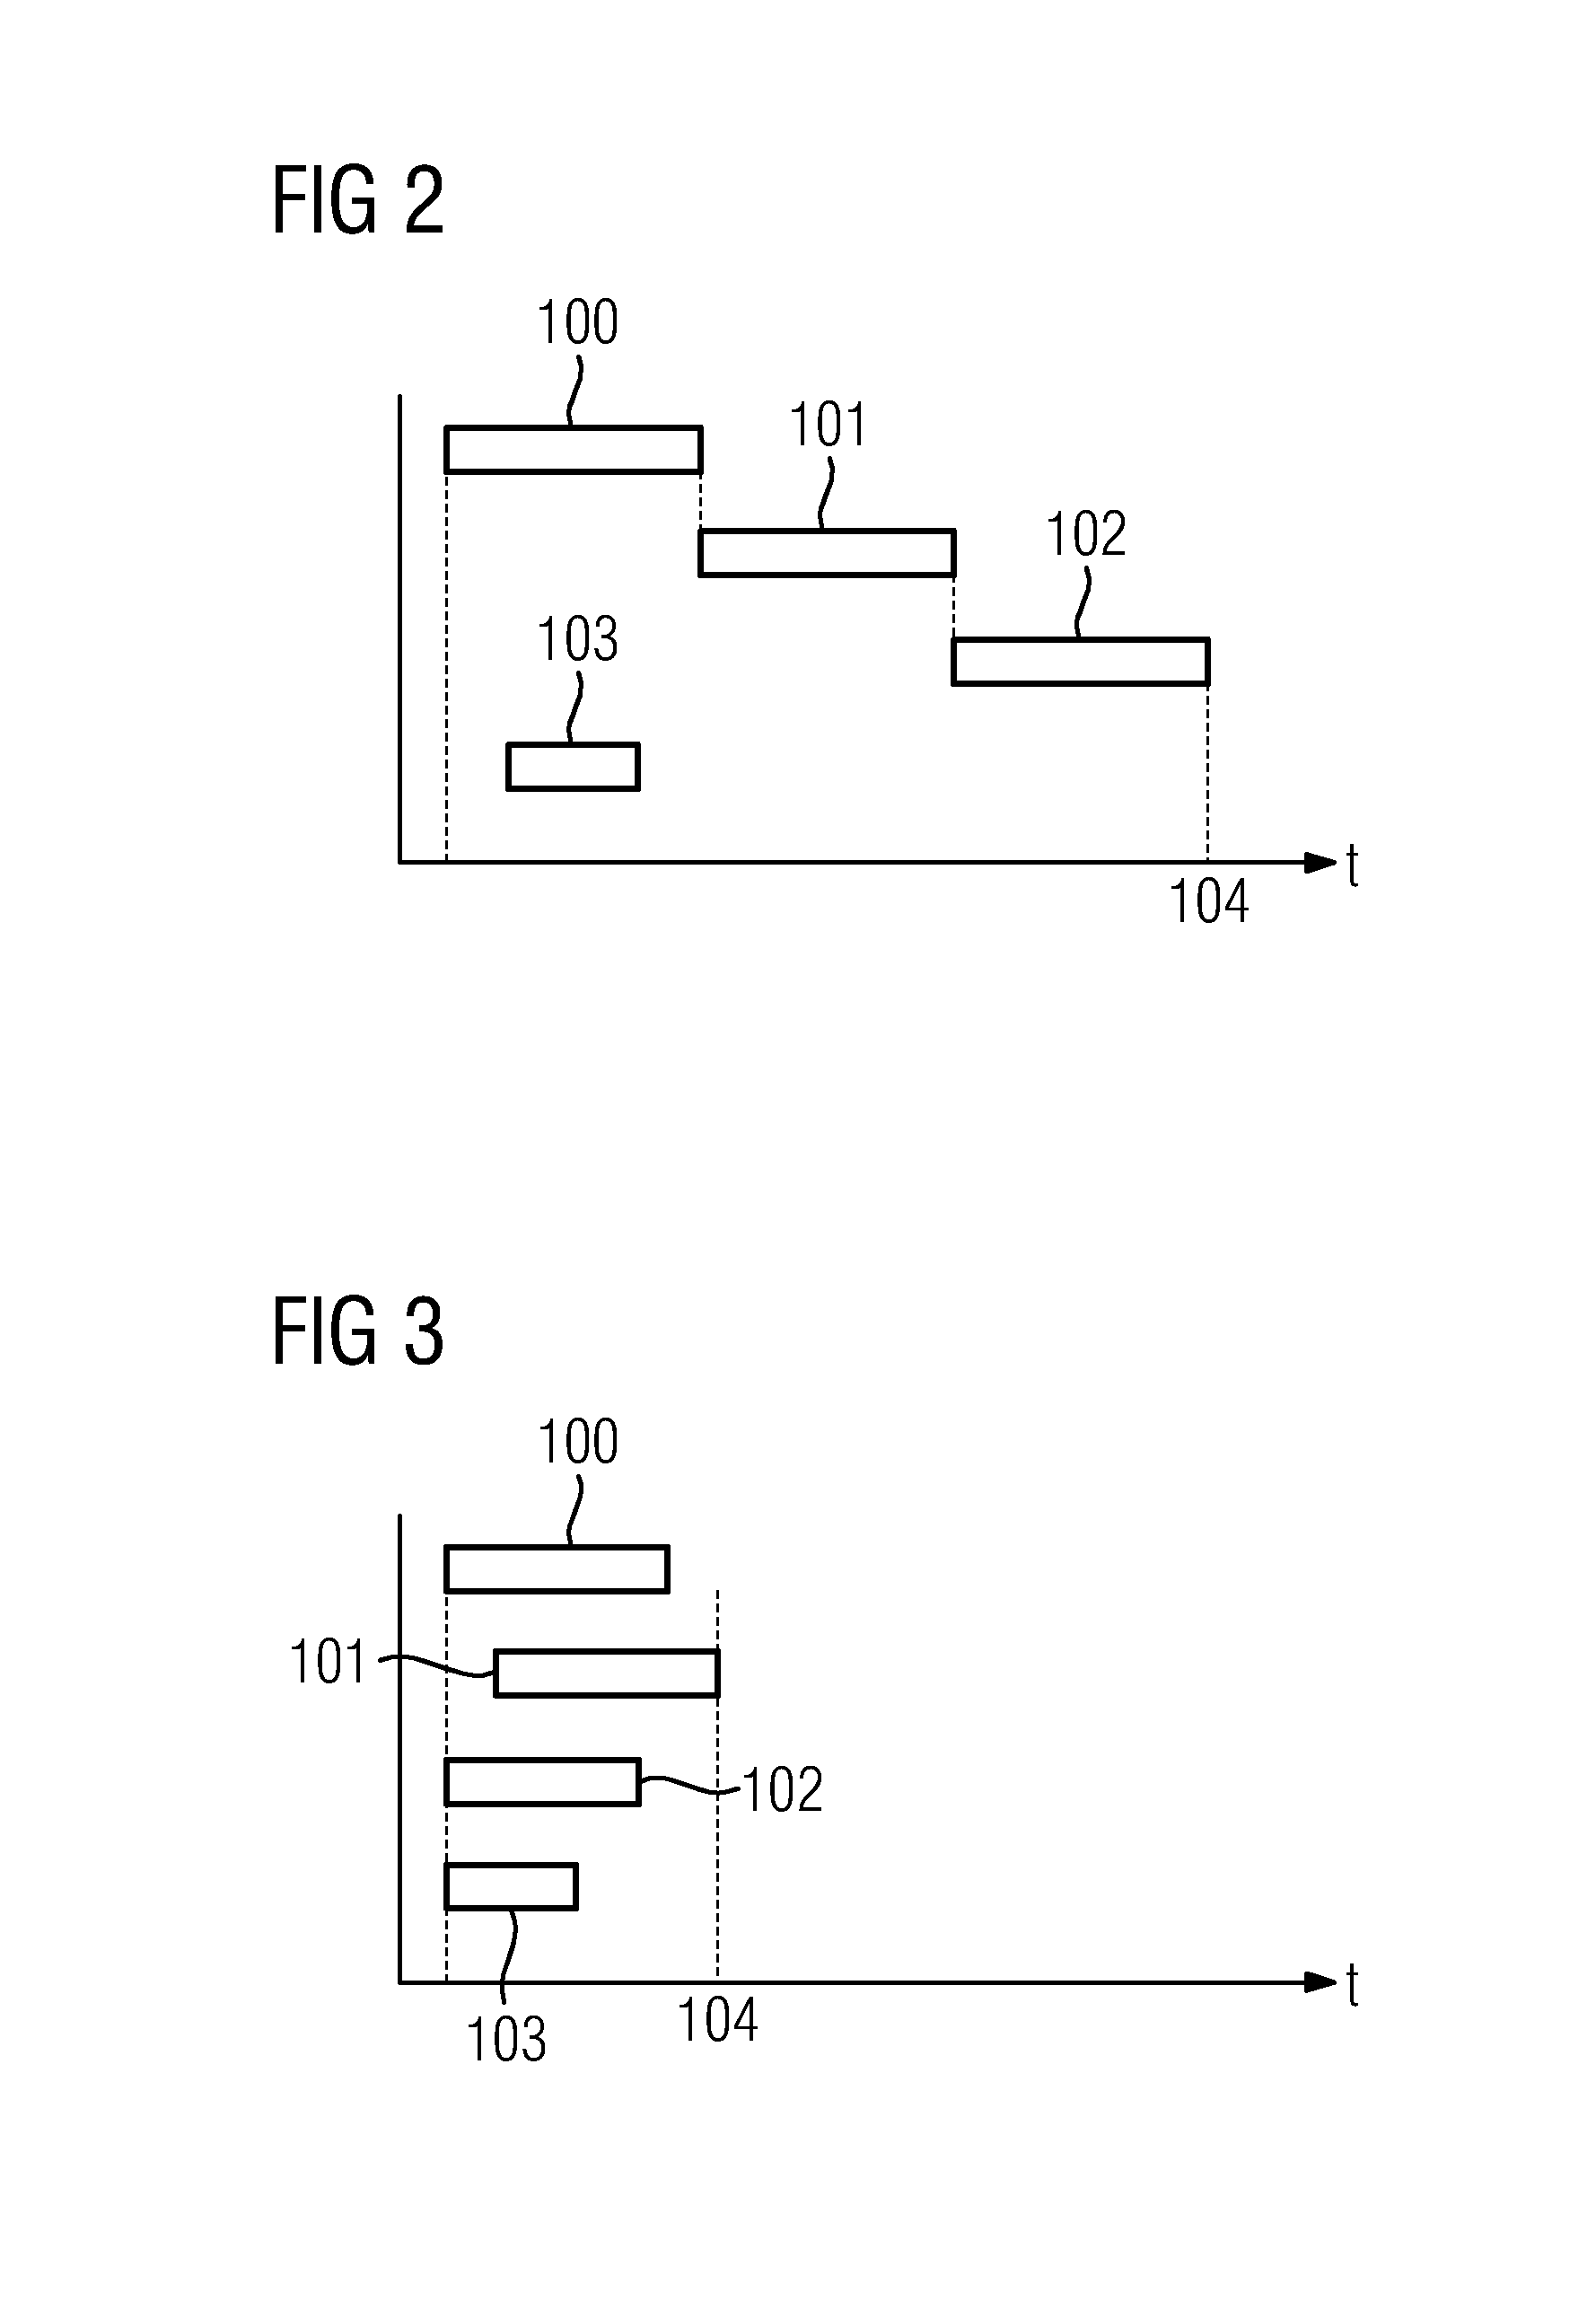 Method for quickly connecting a steam generator